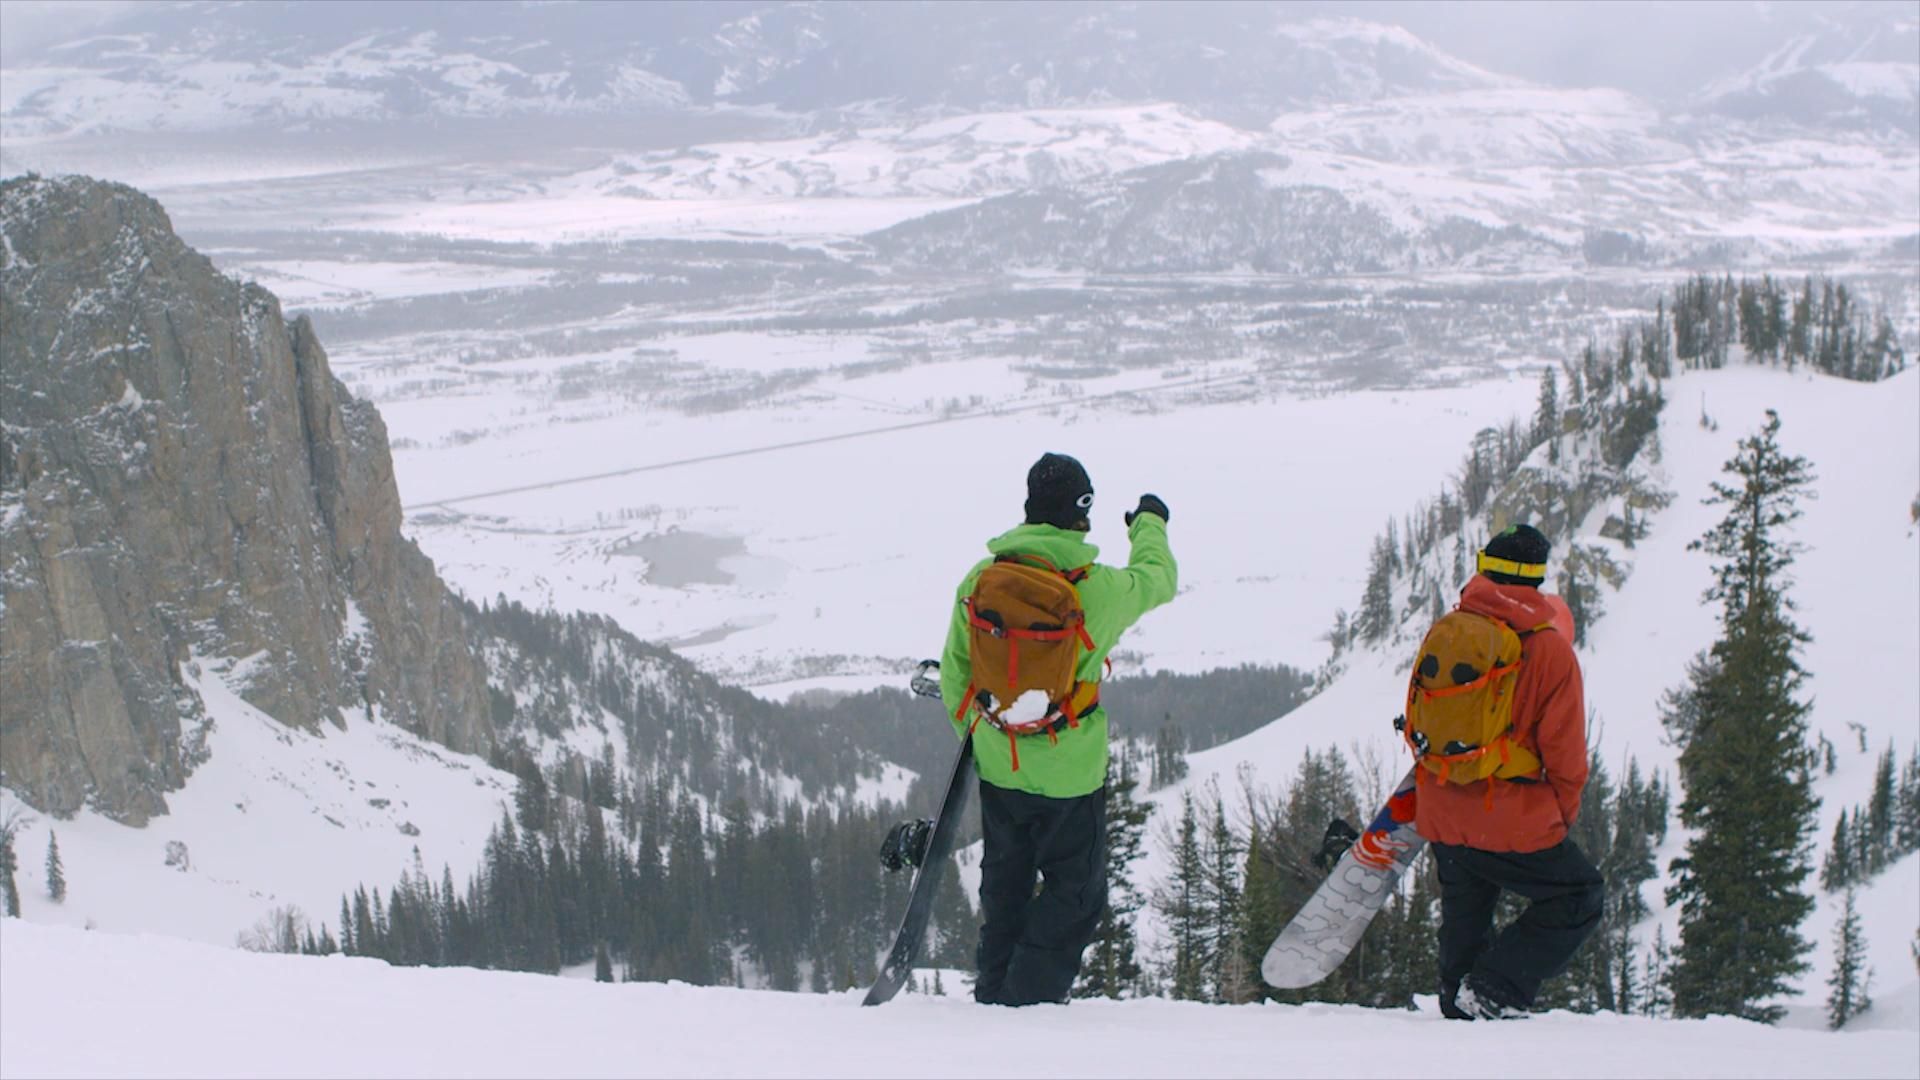 Real Snow Backcountry 2015 is coming - ESPN Video